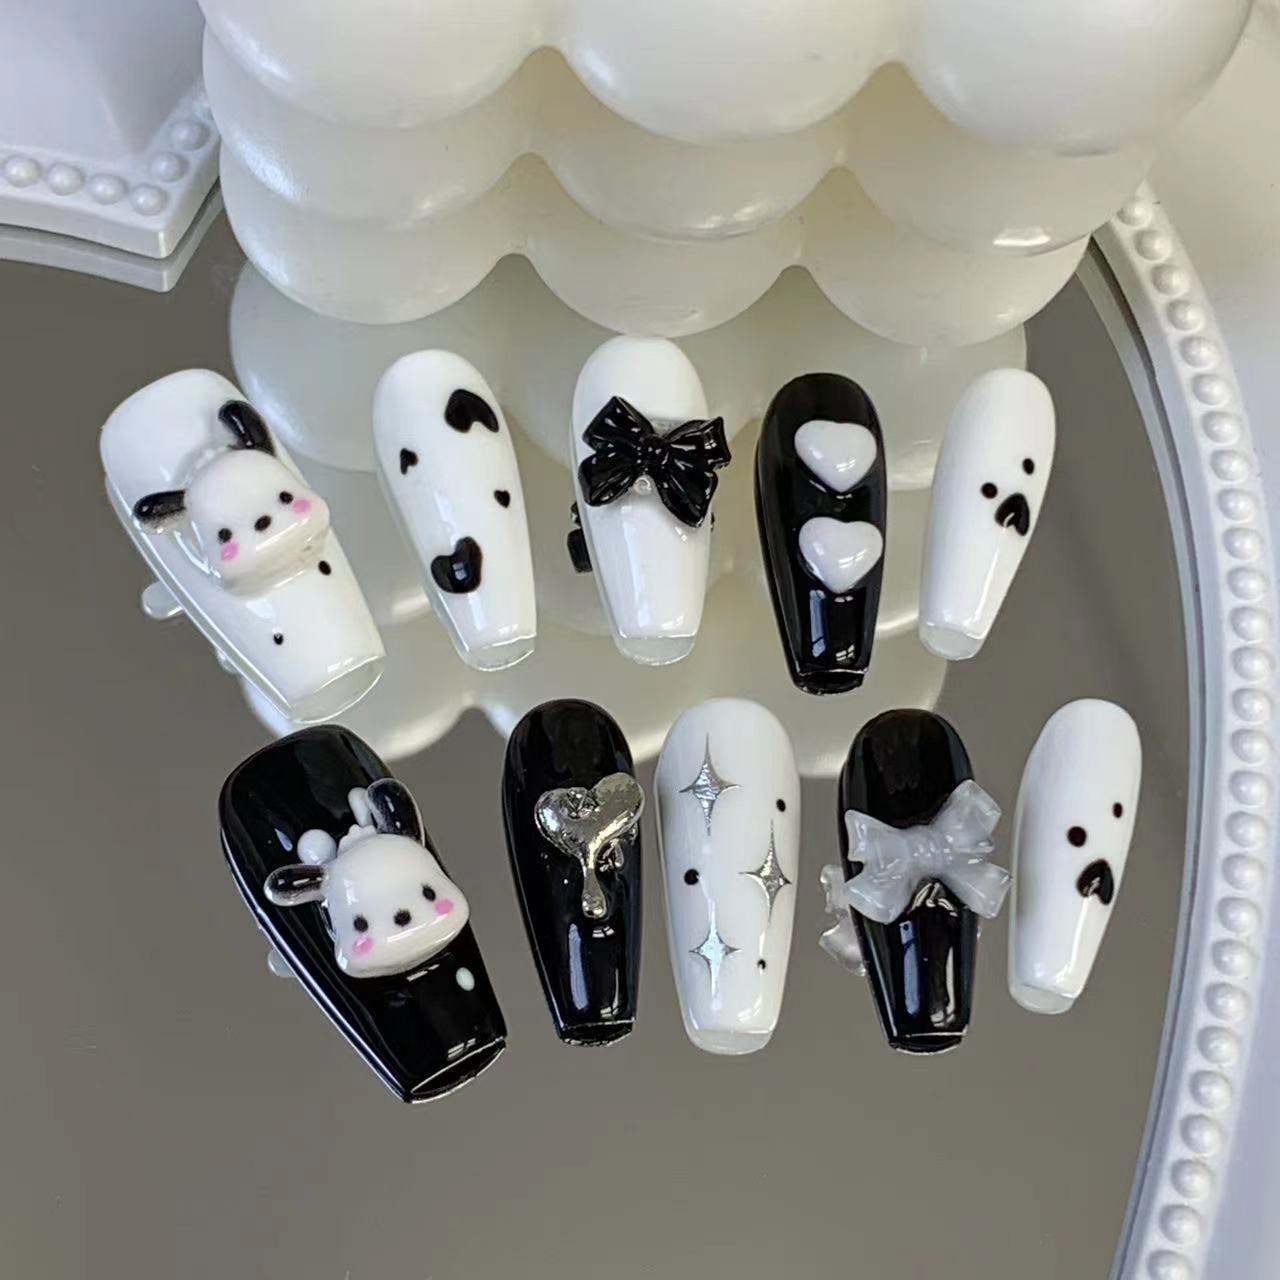 POCHACCO-TEN PIECES OF HANDCRAFTED PRESS ON NAIL